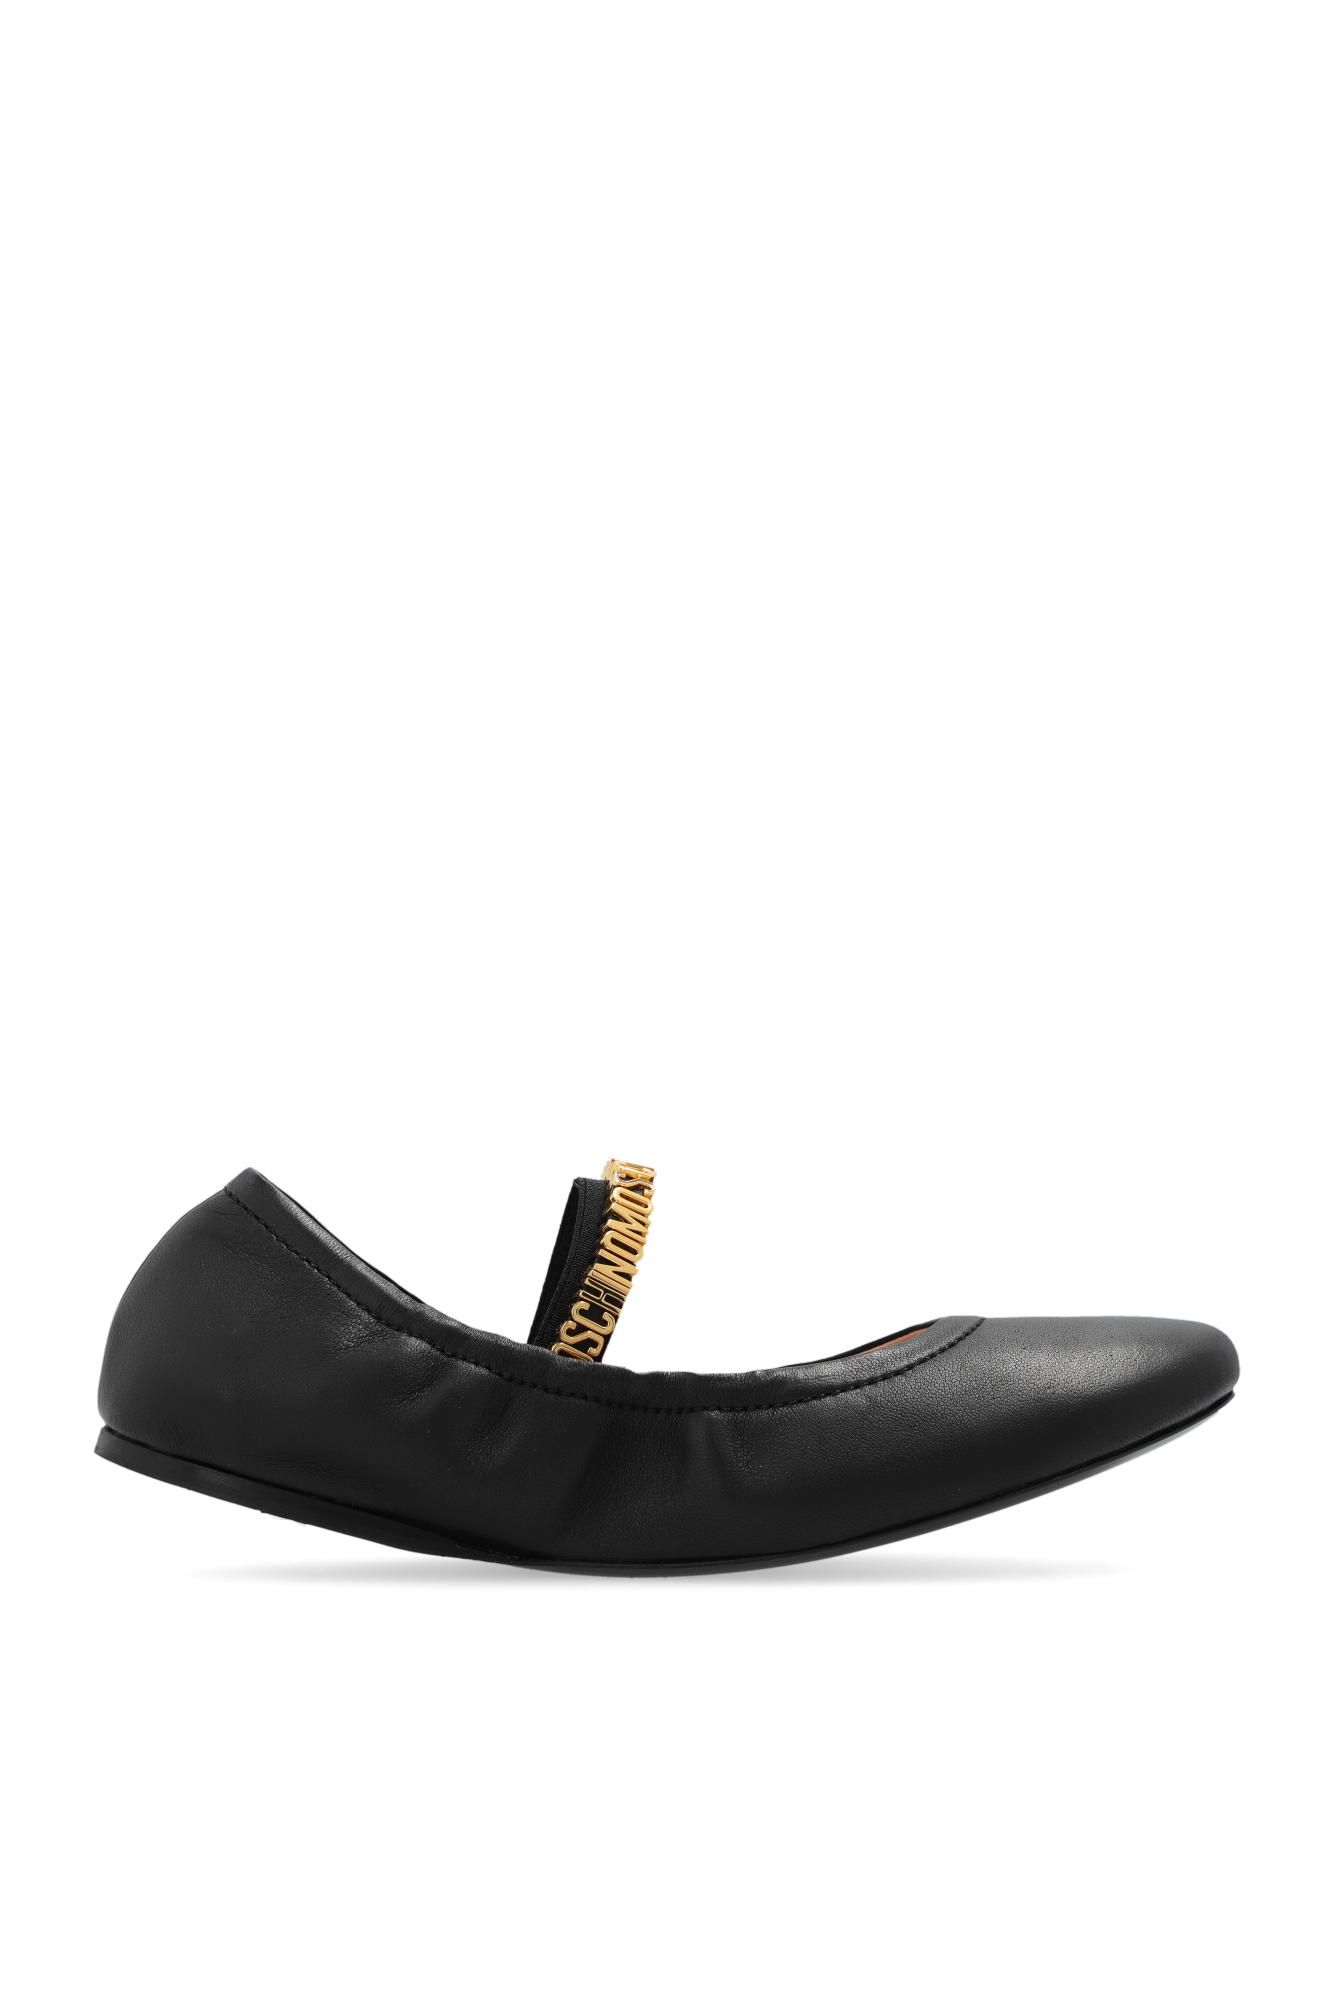 Moschino Leather ballet flats